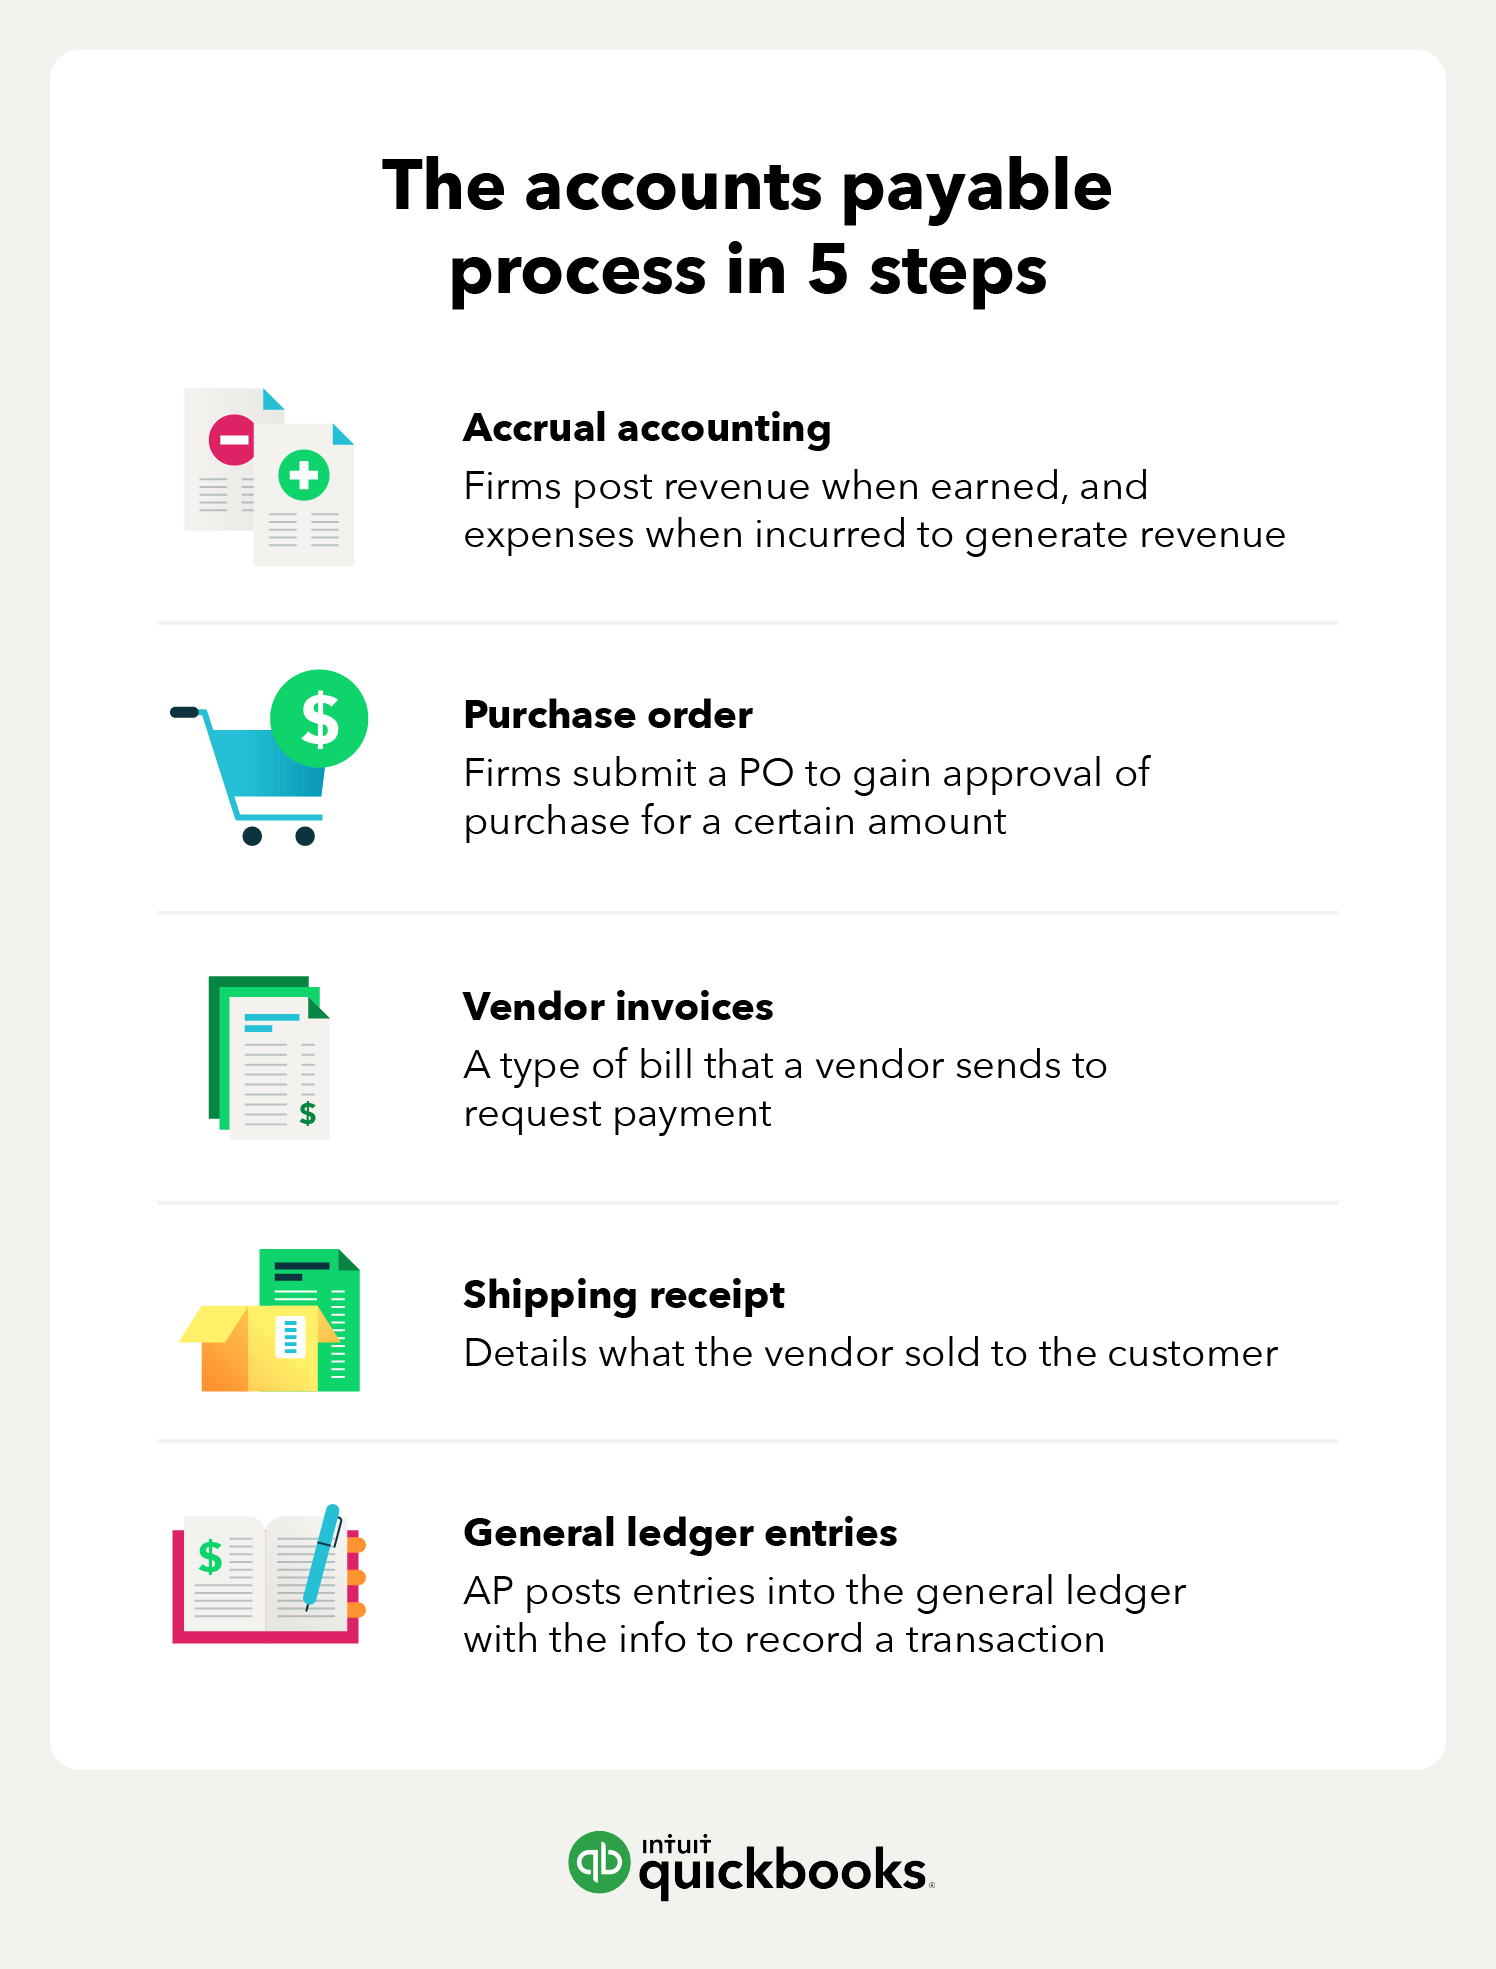 The accounts payable process in 5 steps.